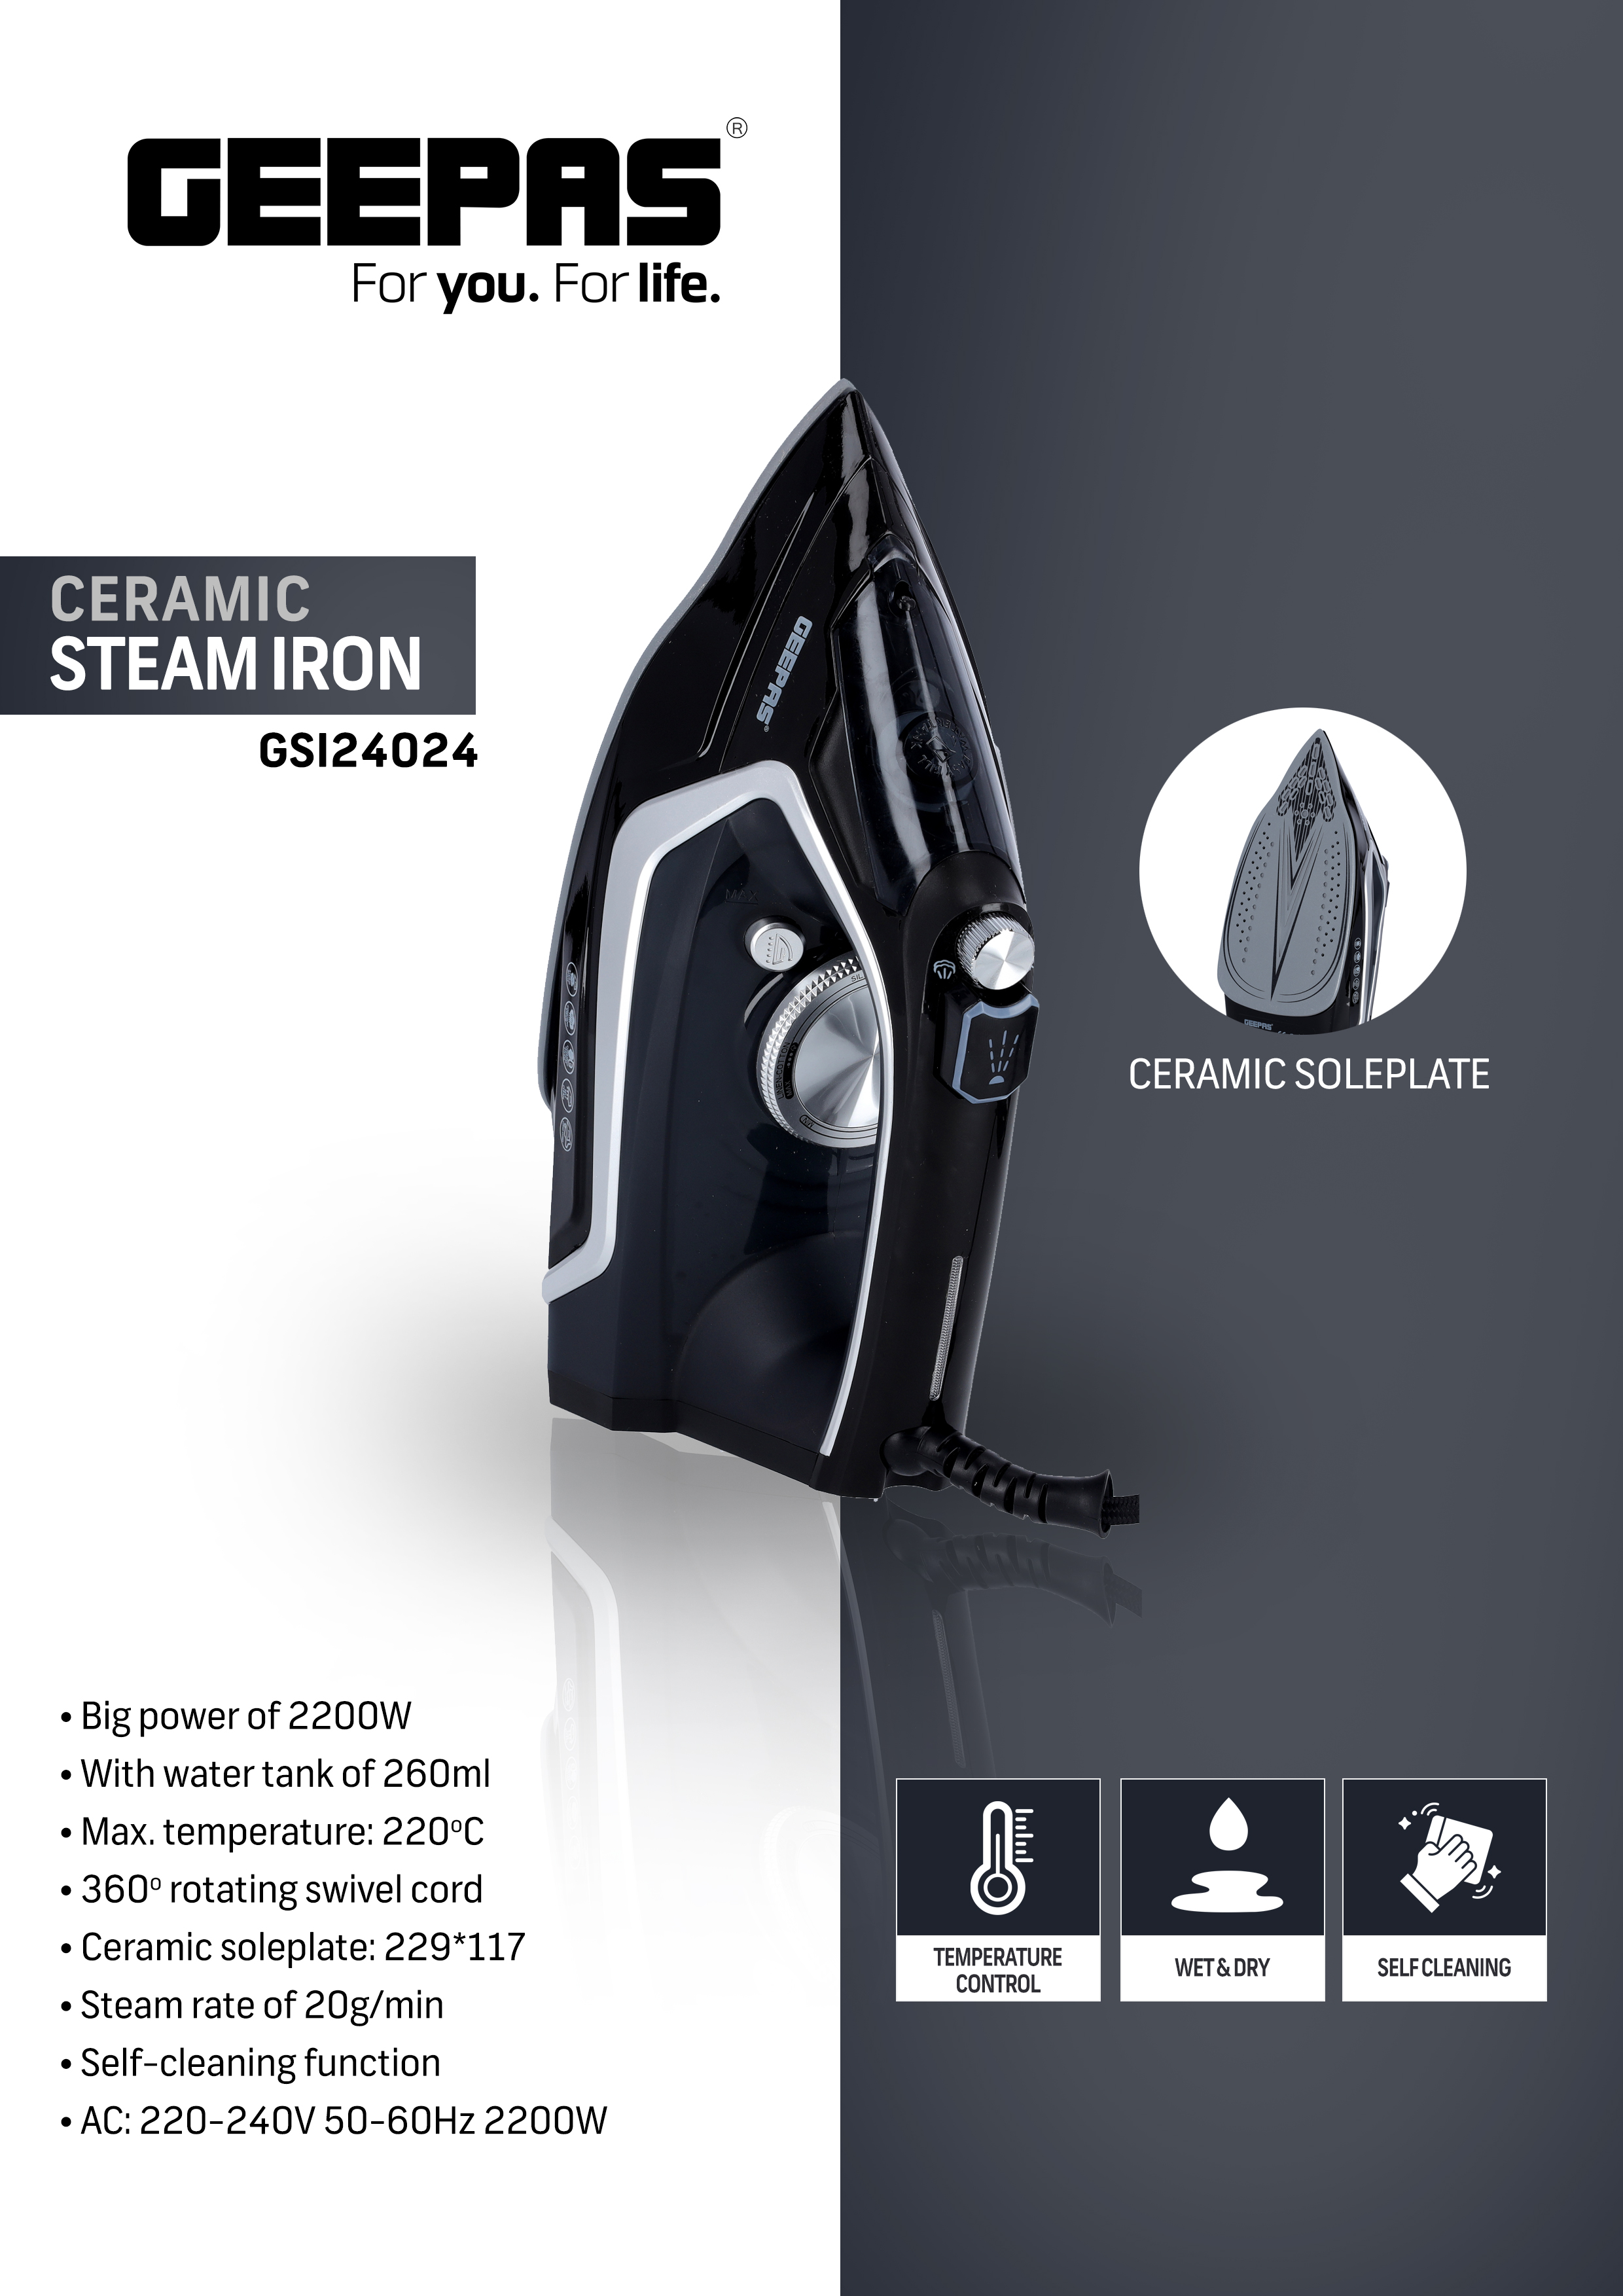 Adjustable Temperature Control Steam Function with Ceramic Coating Plate 2 Year Warranty Geepas 2200W Steam Iron for Crisp Ironed Clothes